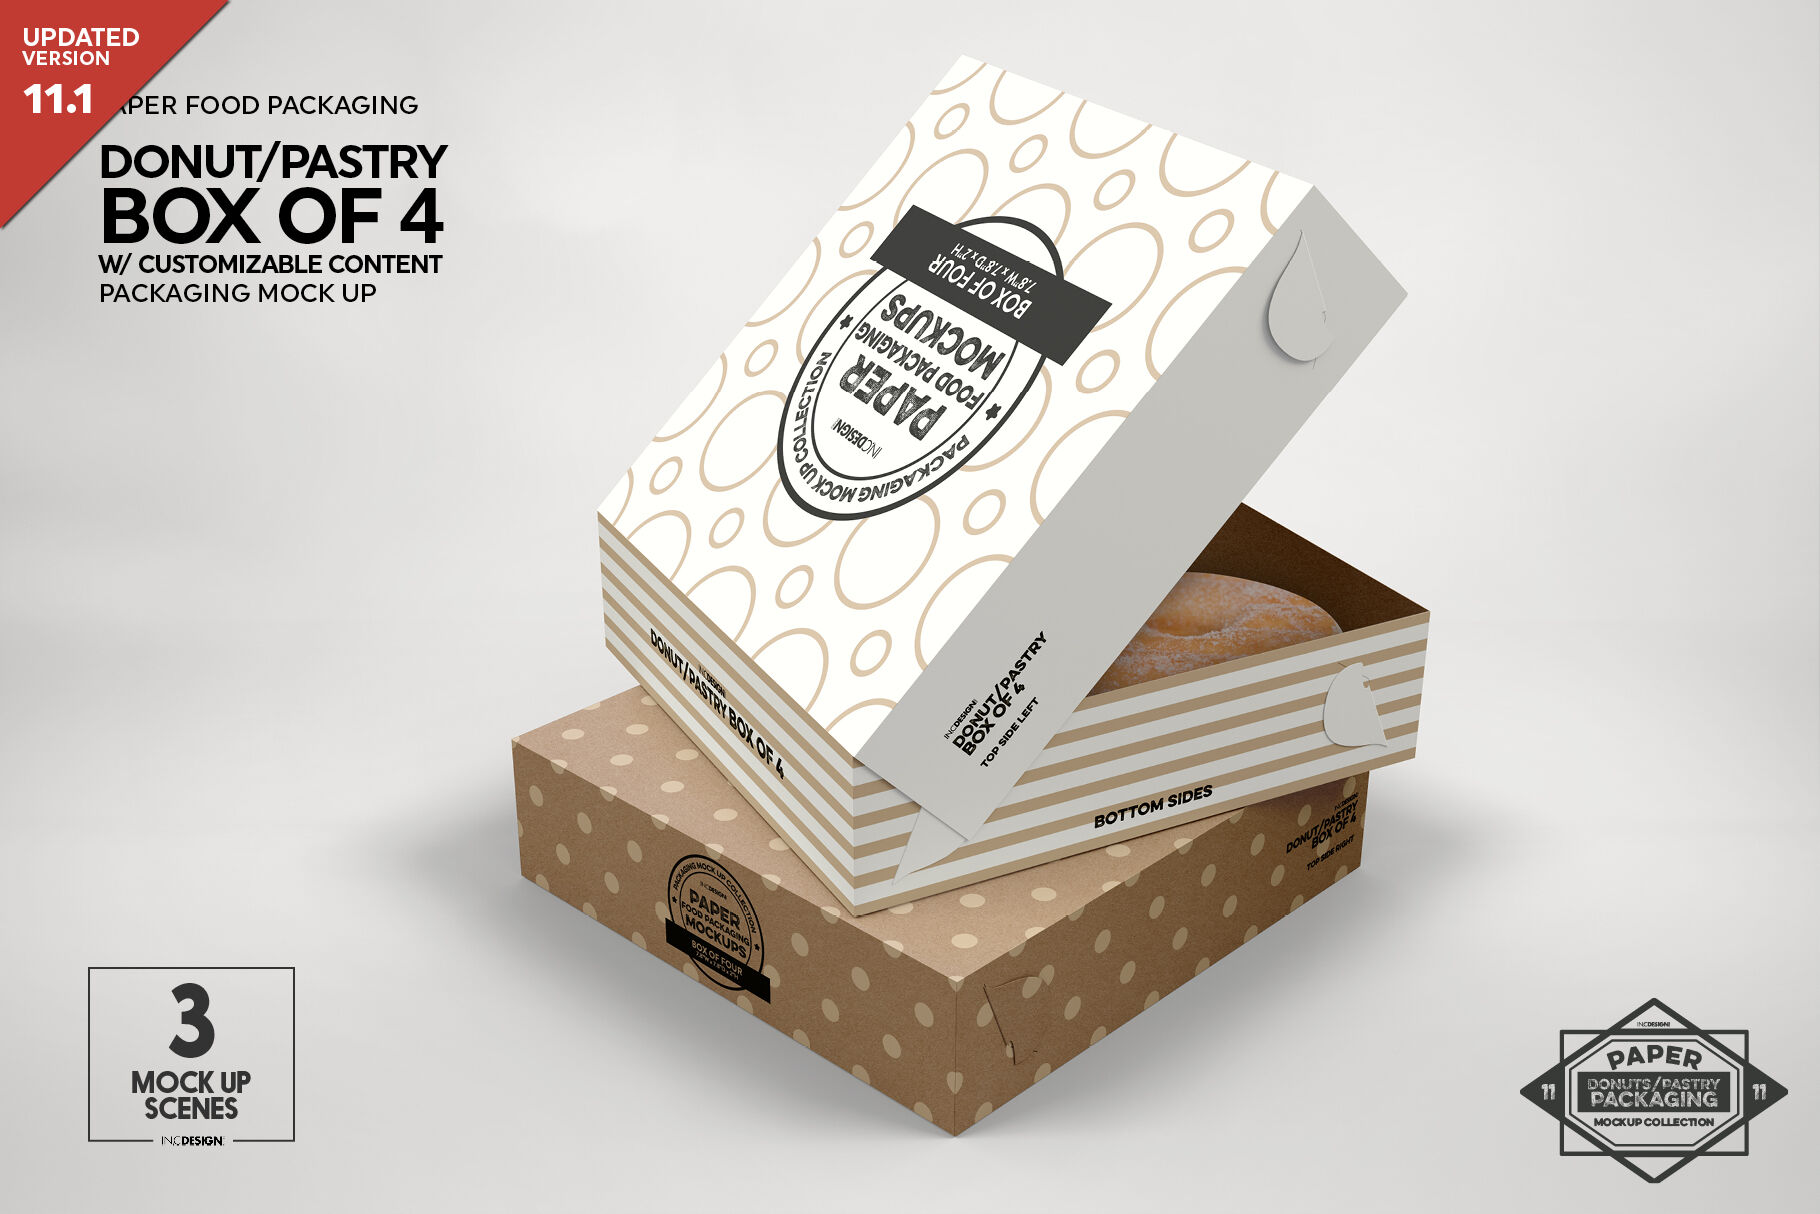 Download Box of Four Donut Pastry Box Mockup By INC Design Studio ...